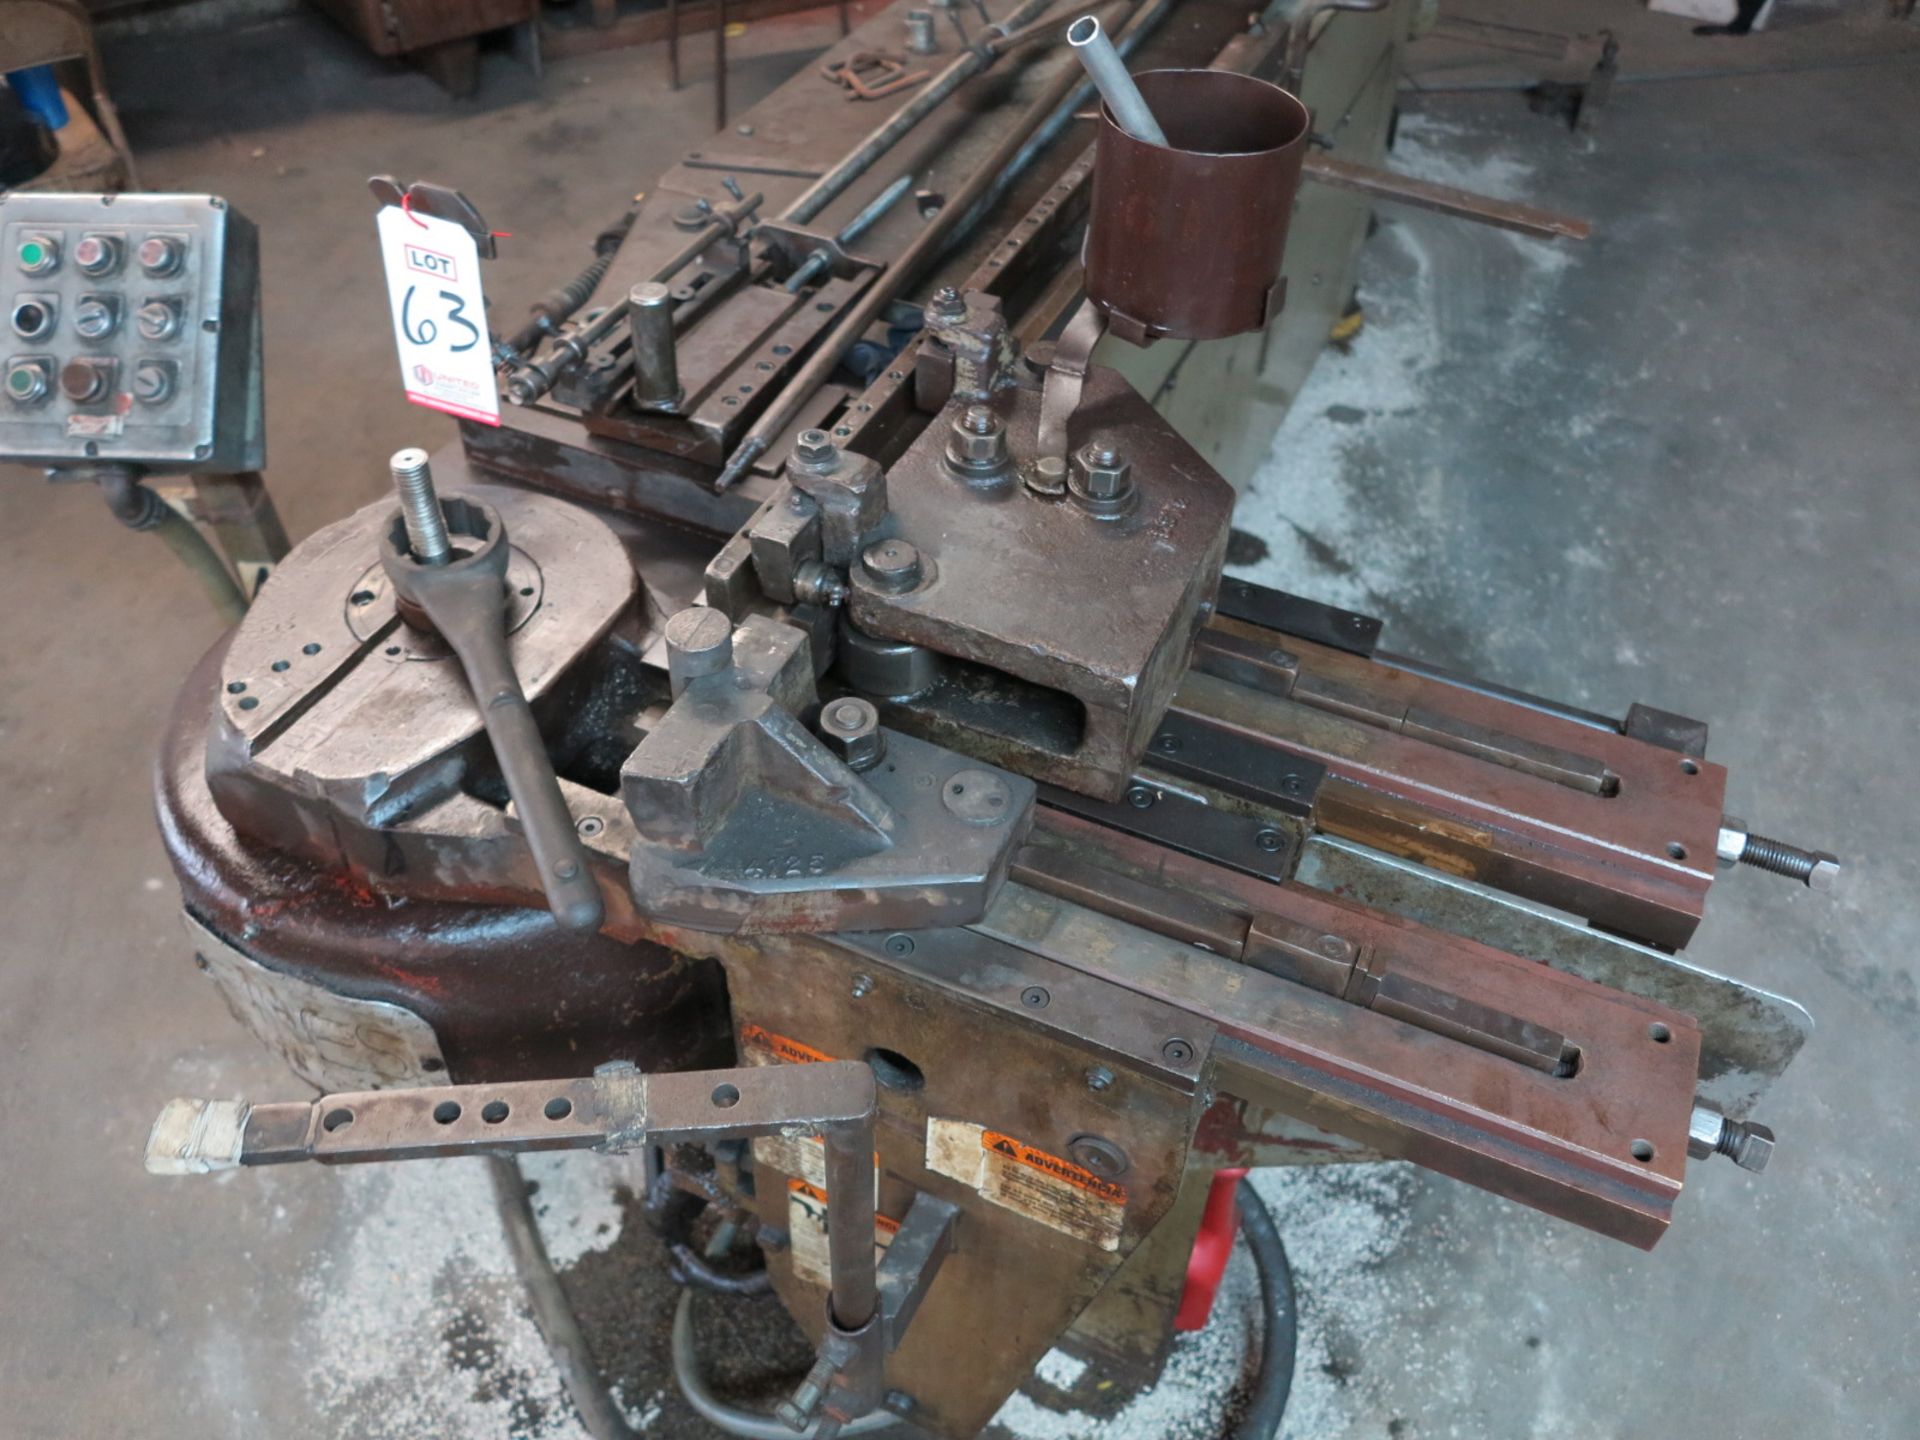 PINES #1 HORIZONTAL TUBE BENDER, 2" OD, HYDRAULIC MANDREL EXTRACTOR, 8' TRAVEL, S/N 11205-65001 - Image 4 of 4